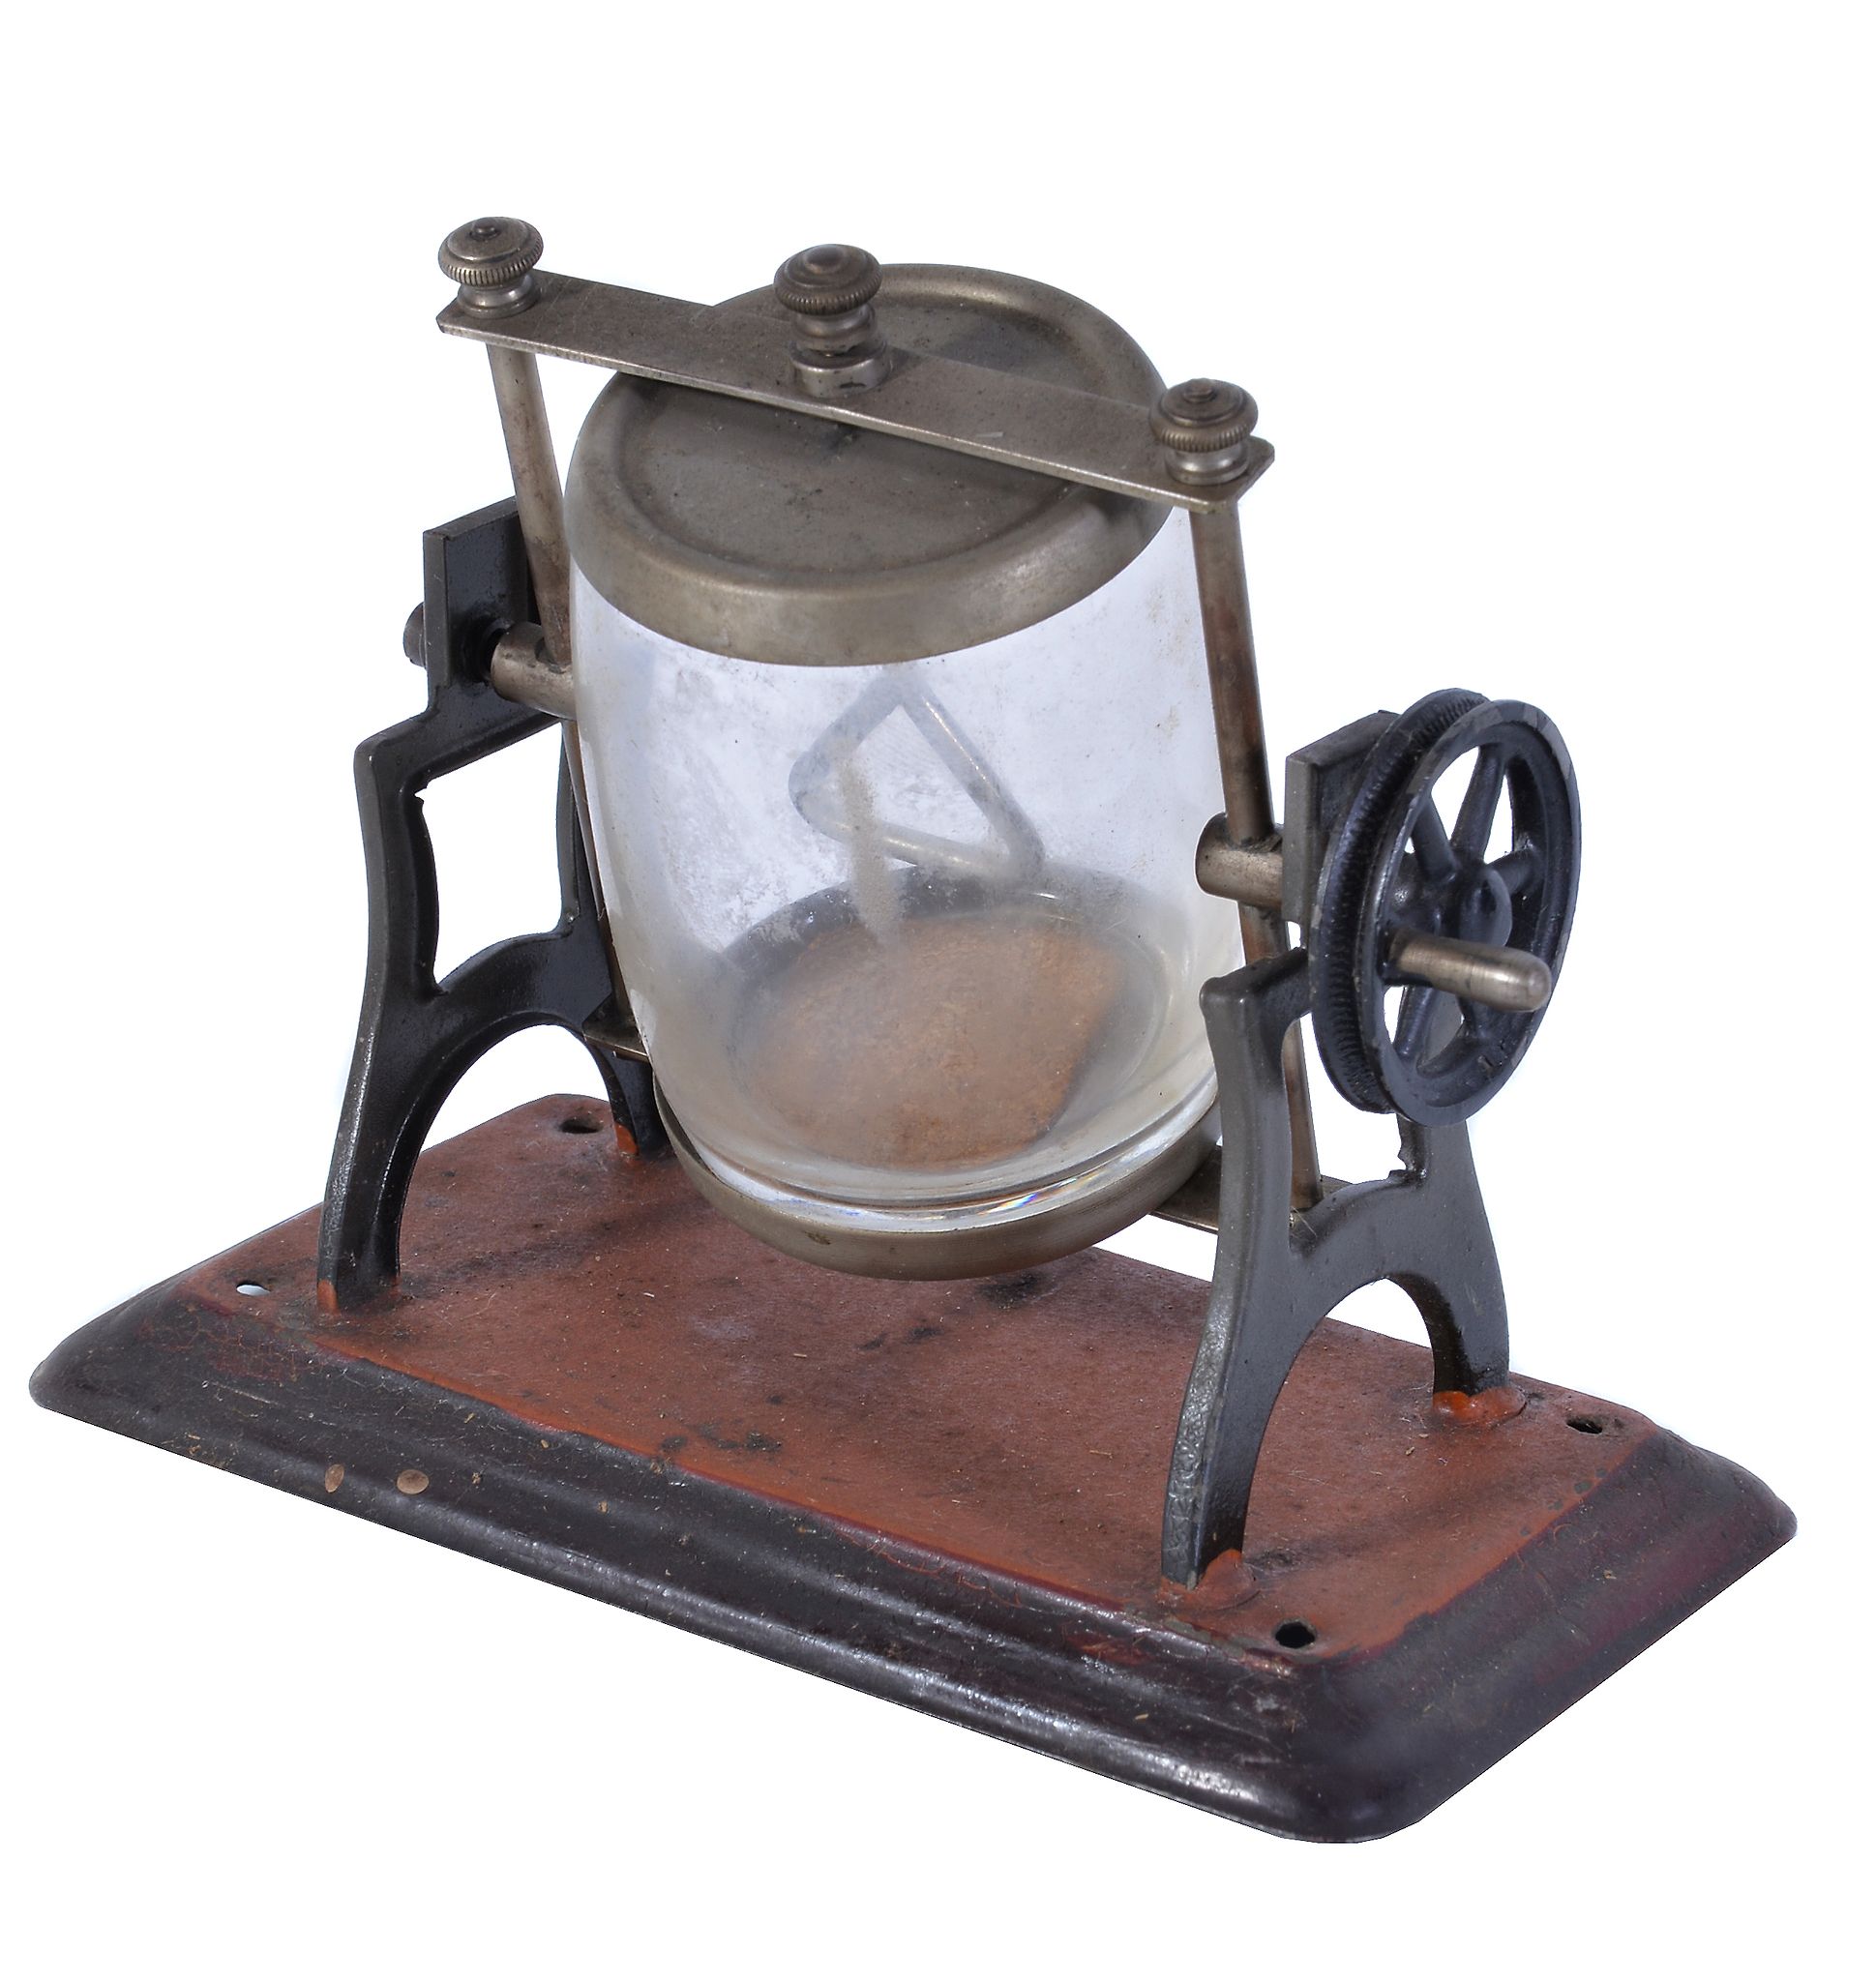 A rare Marklin model of a butter churn, being hand operated or may be used with belt drive from toy - Image 2 of 3